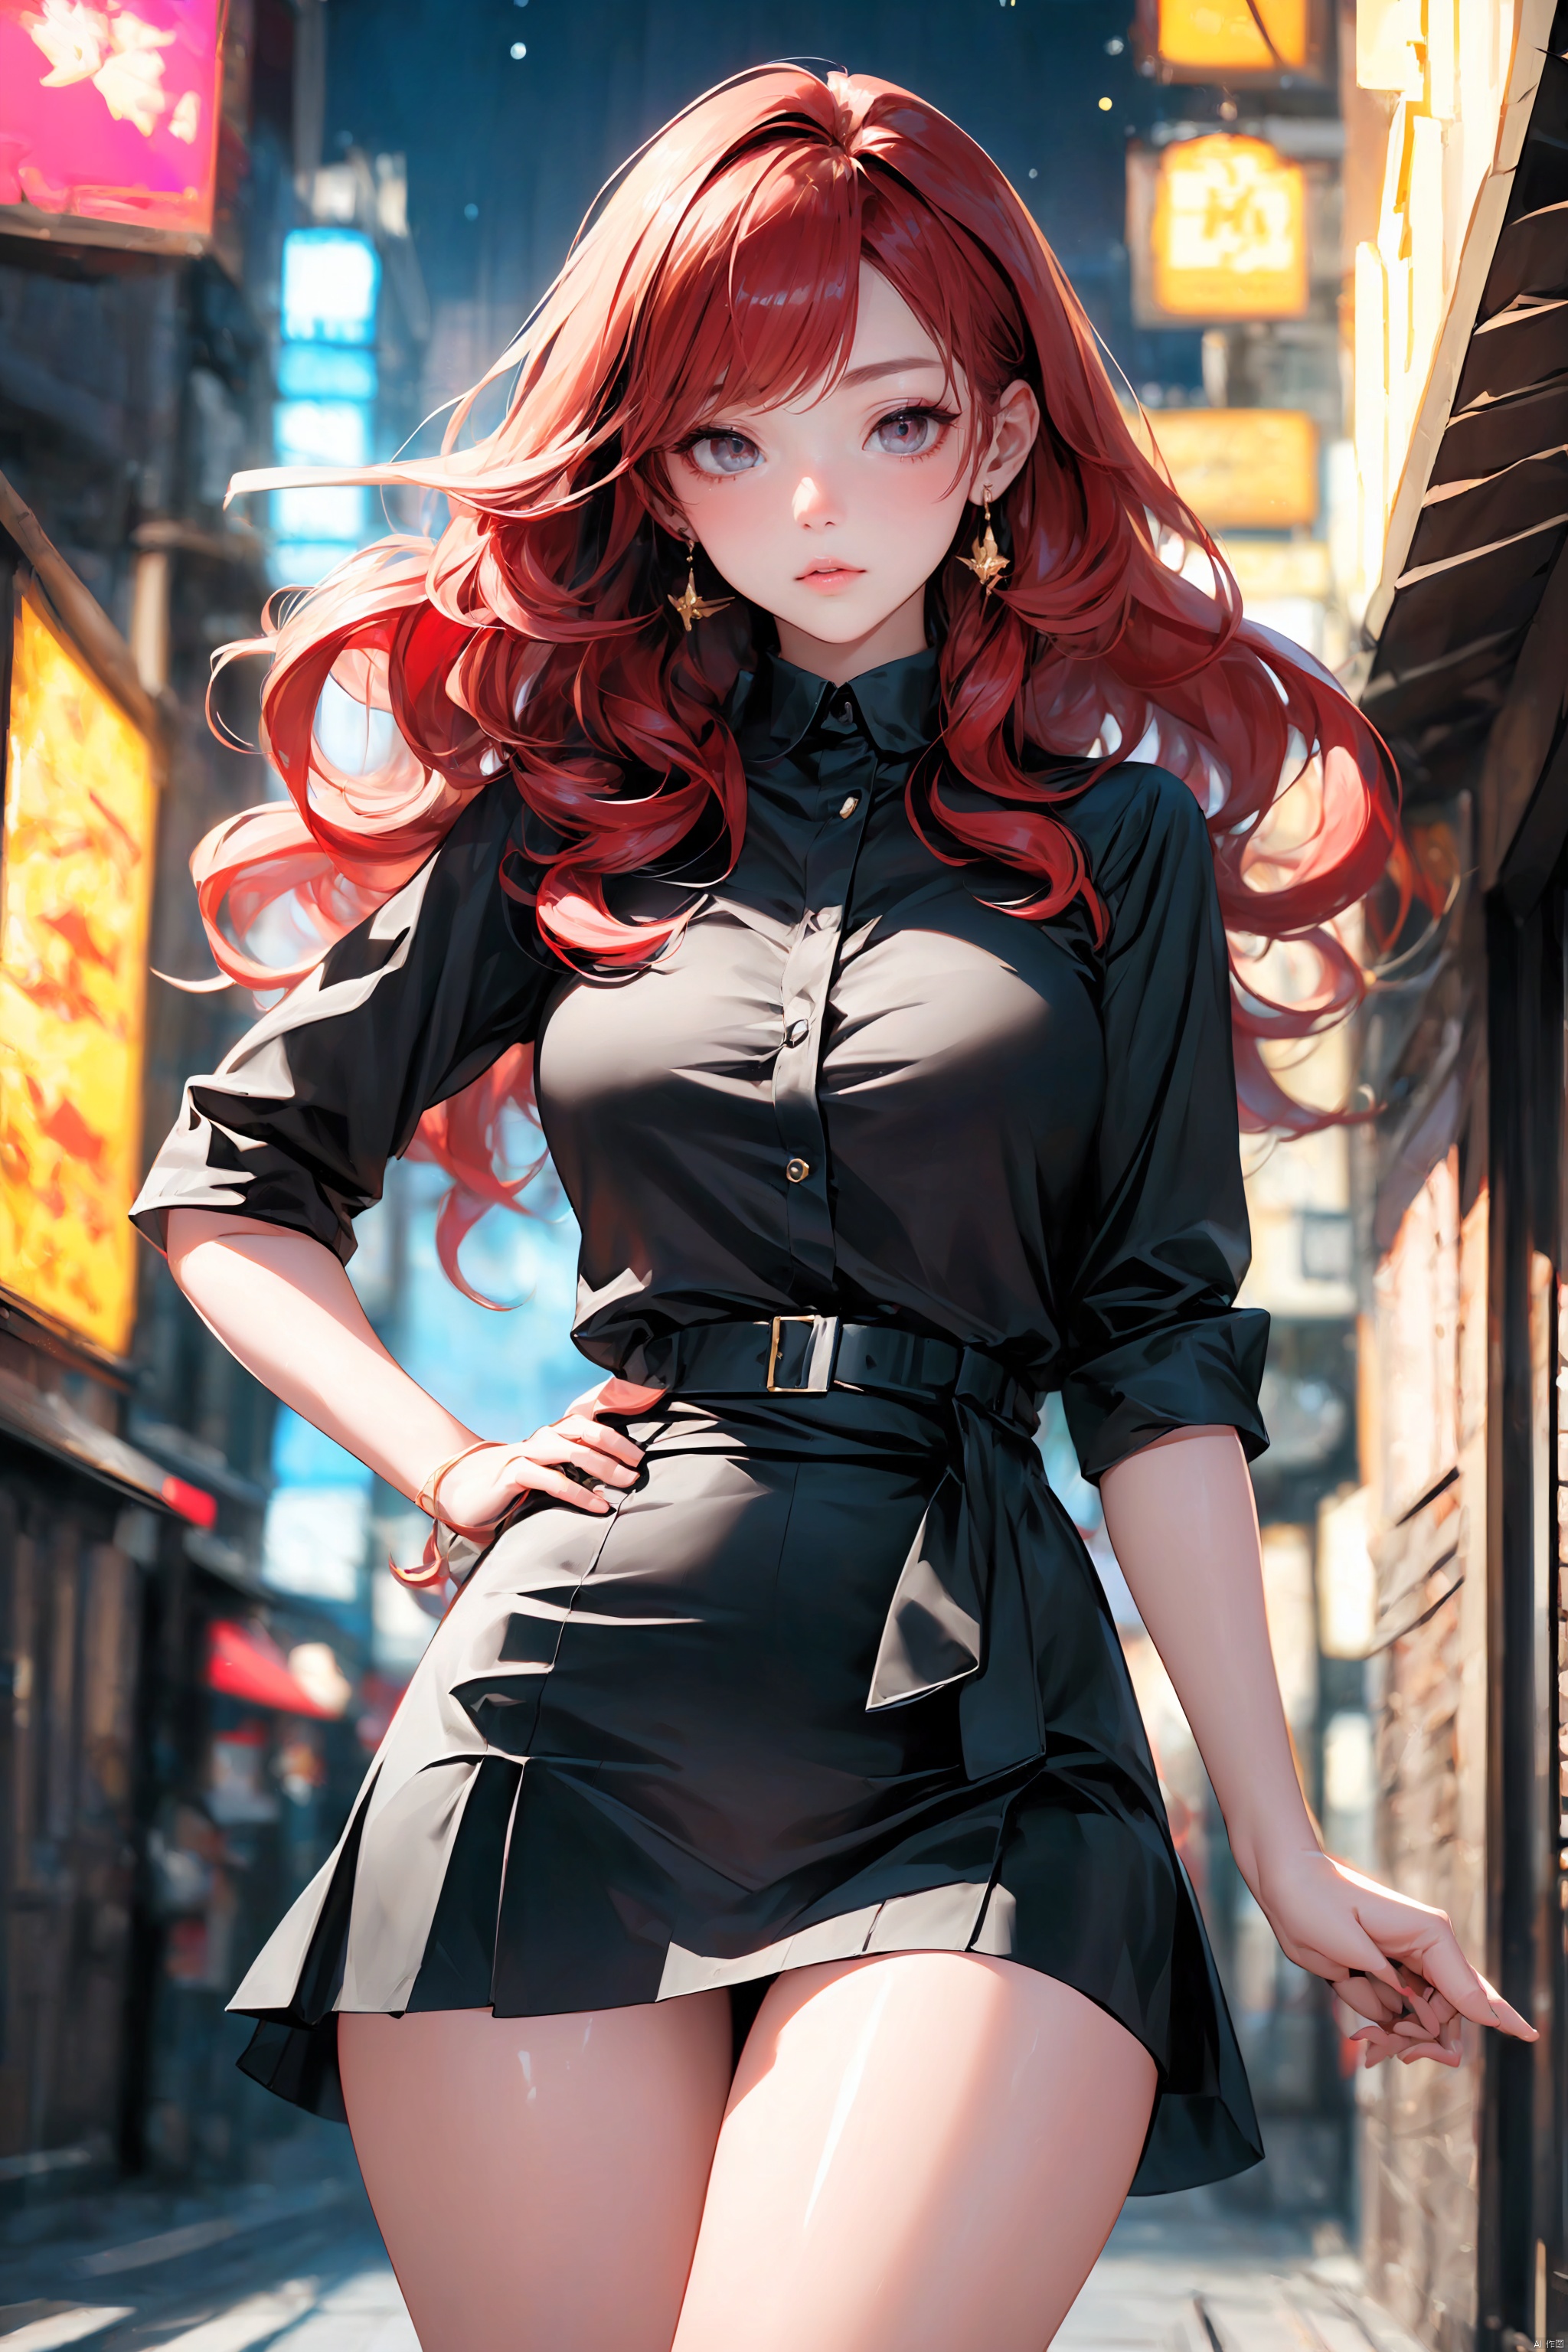  KK-Comic Style, looking at viewer,
bangs,lips, makeup, on bed,
(pure red hair:1.4), (black eyes:1.3)
crop_top, 
skirt, night_sky, rooftop, city, 
neon lights, highly detailed, 
ultra-high resolutions, 32K UHD,
best quality, masterpiece,
partiallysubmerged, flower, airbubble, ((poakl))

1girl\((bishoujo), (lovely face:1.4), (pure red hair:1.4), (black eyes:1.3), (papaya-shaped breasts:1.1), curly_hair, long_hair, (hair_past_waist:1.4), plump_*****, long_legs, sharp_eyelid, black eyeliner, black eyelashes, red eyeshadow, 
(perfect detailed face), (pink lipgloss:1.3), (perfect hands)\),
golden Ultra-thin transparent, (silver Ultra-thin transparent mech:1.3), (all golden color scheme:1.4), 

(miniskirt:1.4)